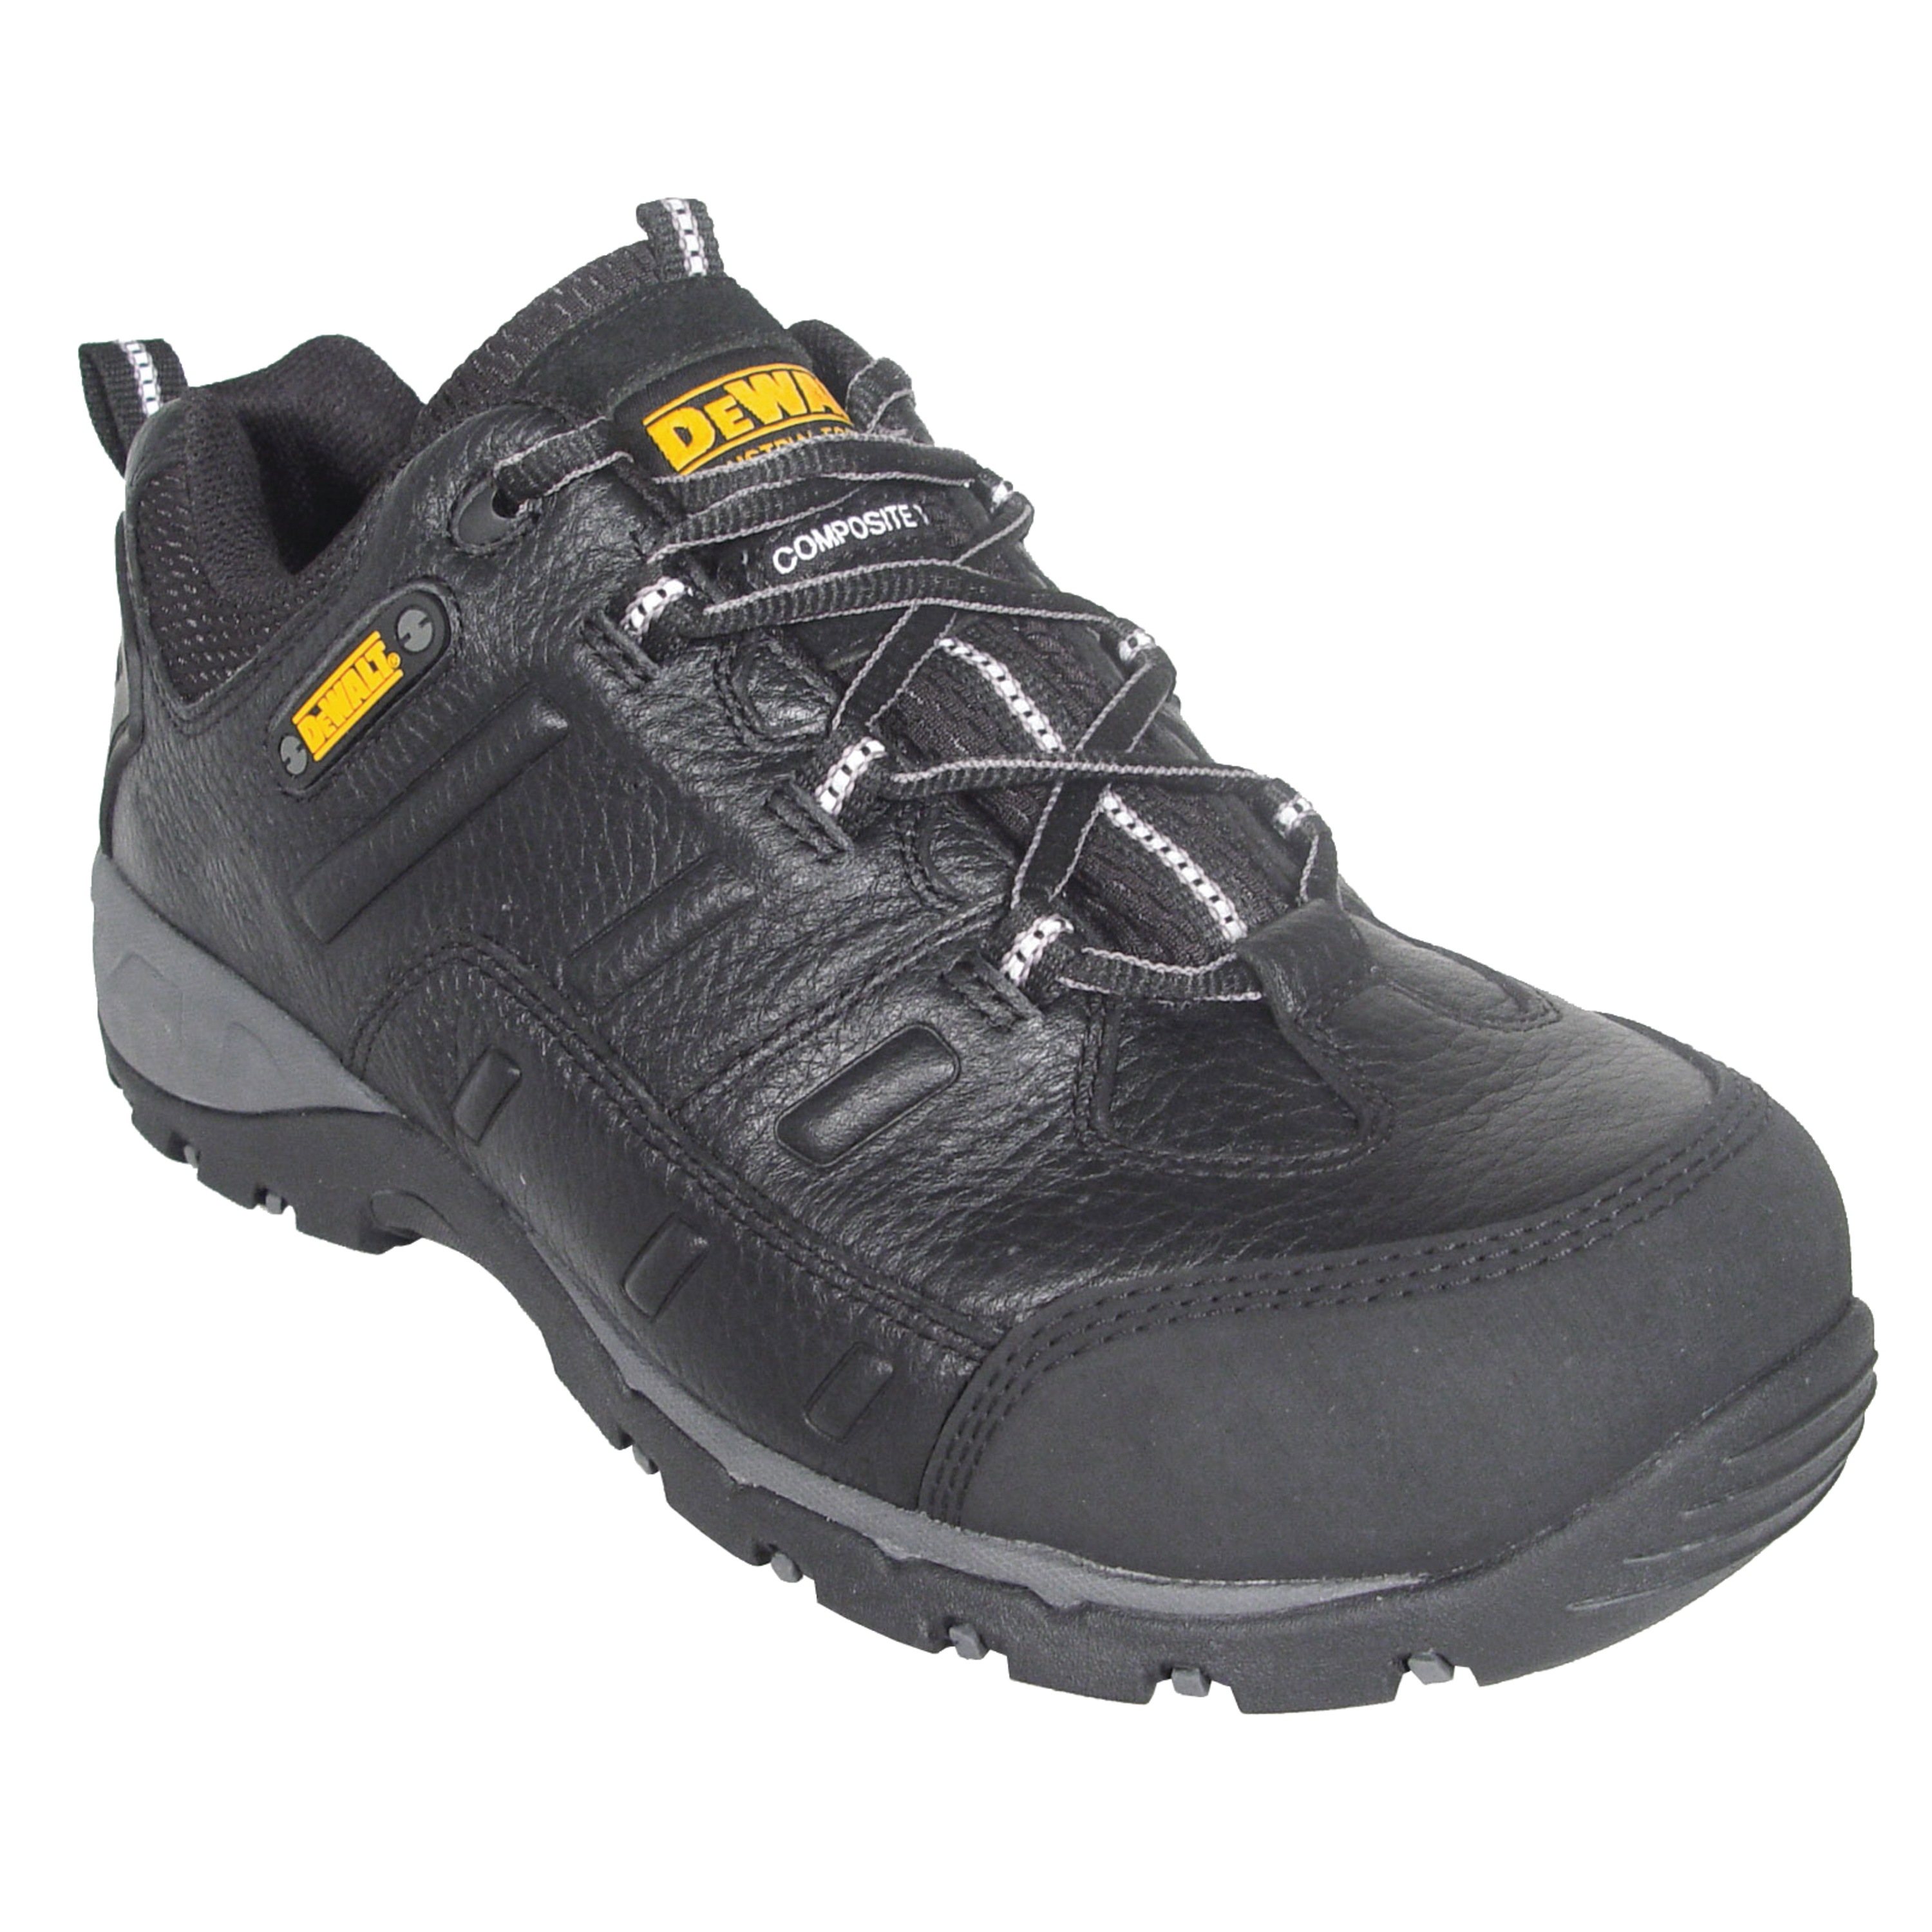 Wrench™ Composite Safety Toe Work boot 